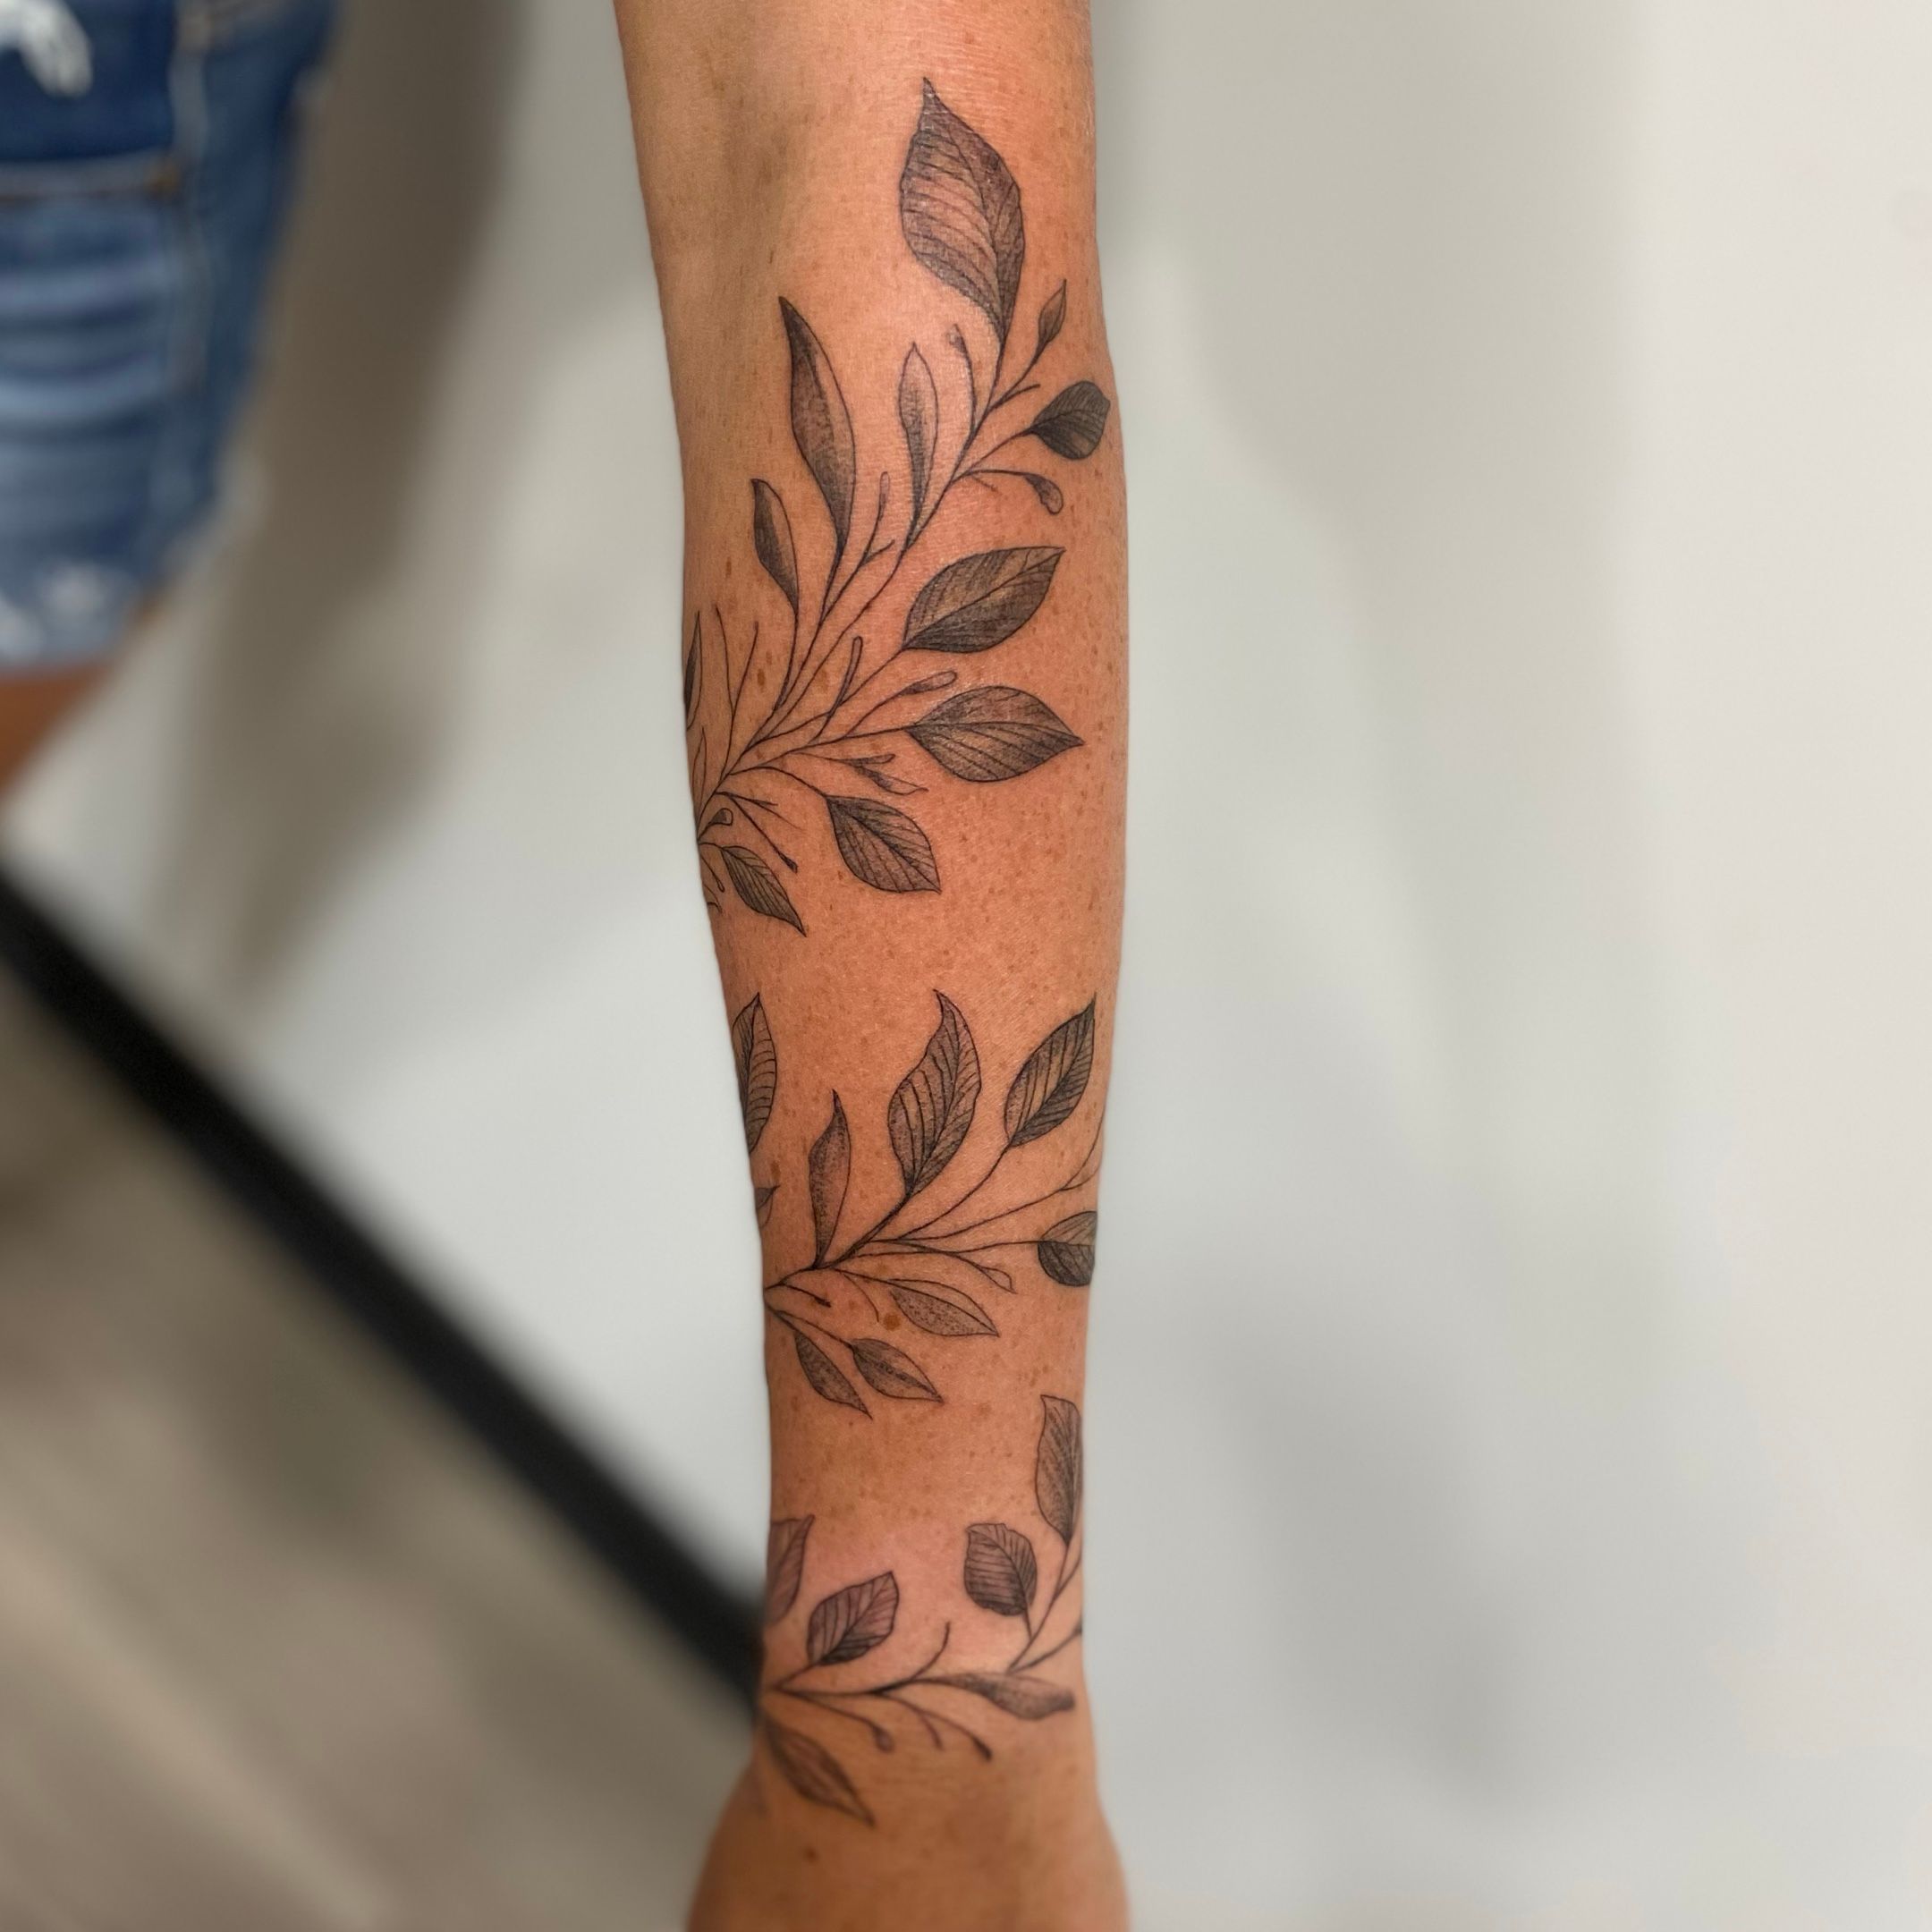 Leaves from the vine tattoo finished by owenmakesart on instagram   rTheLastAirbender